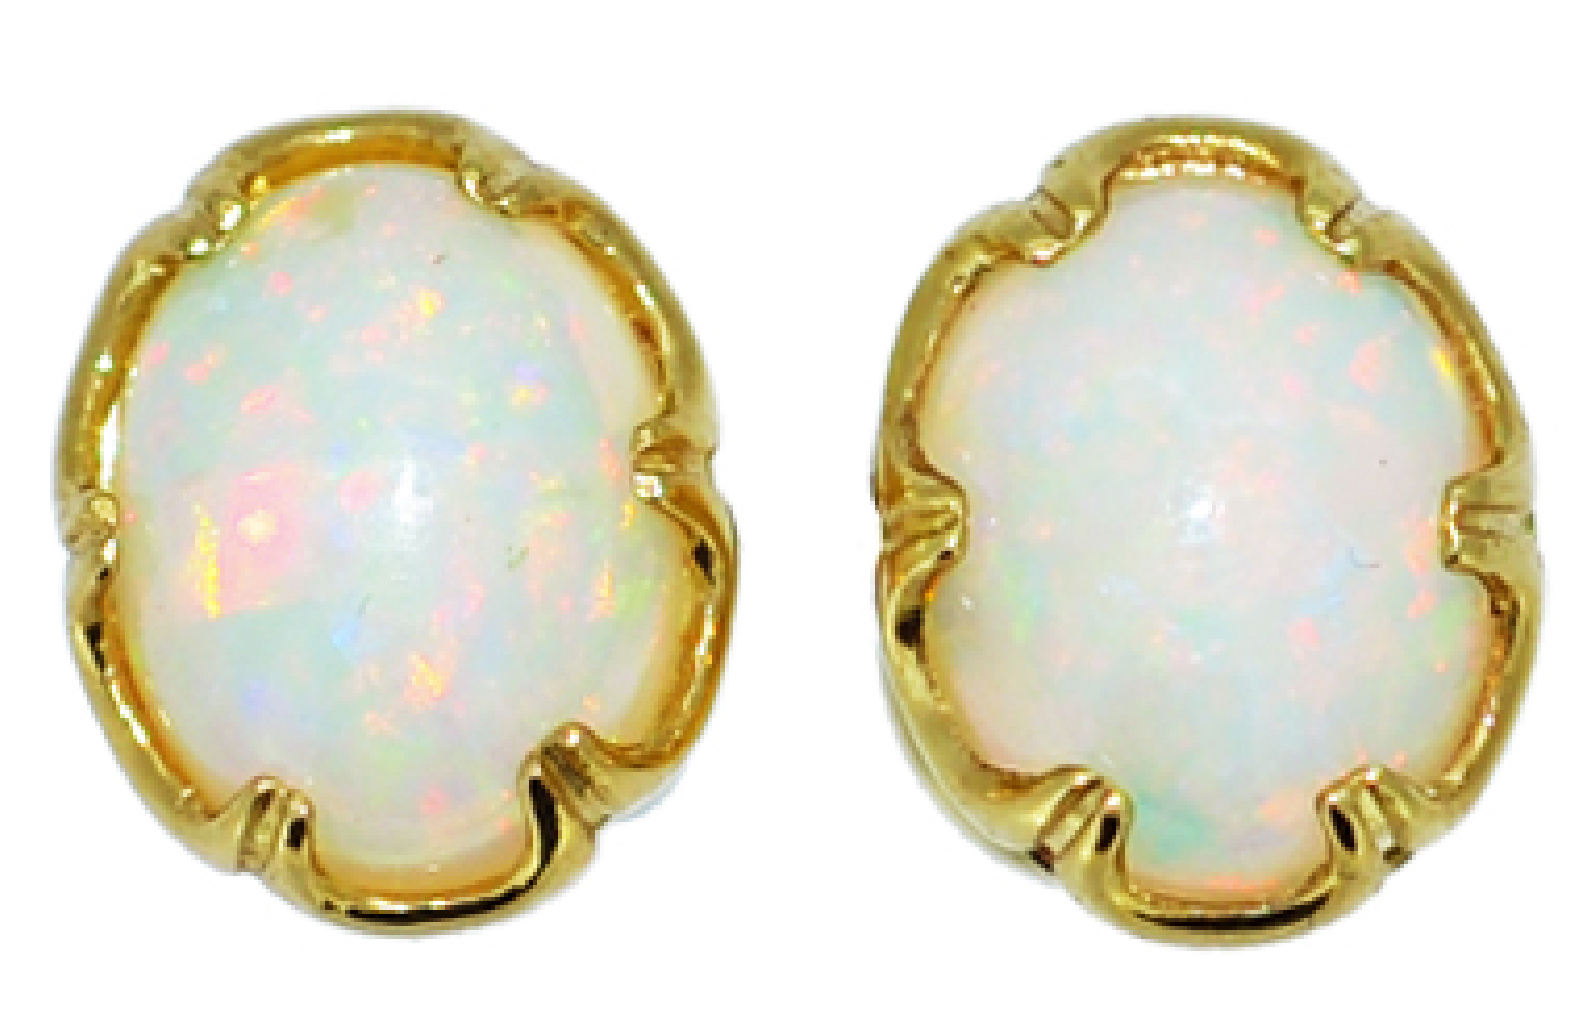 White Opal Earrings by Jessica Surloff. 18K Yellow Gold, 2ct. total weight of Opals